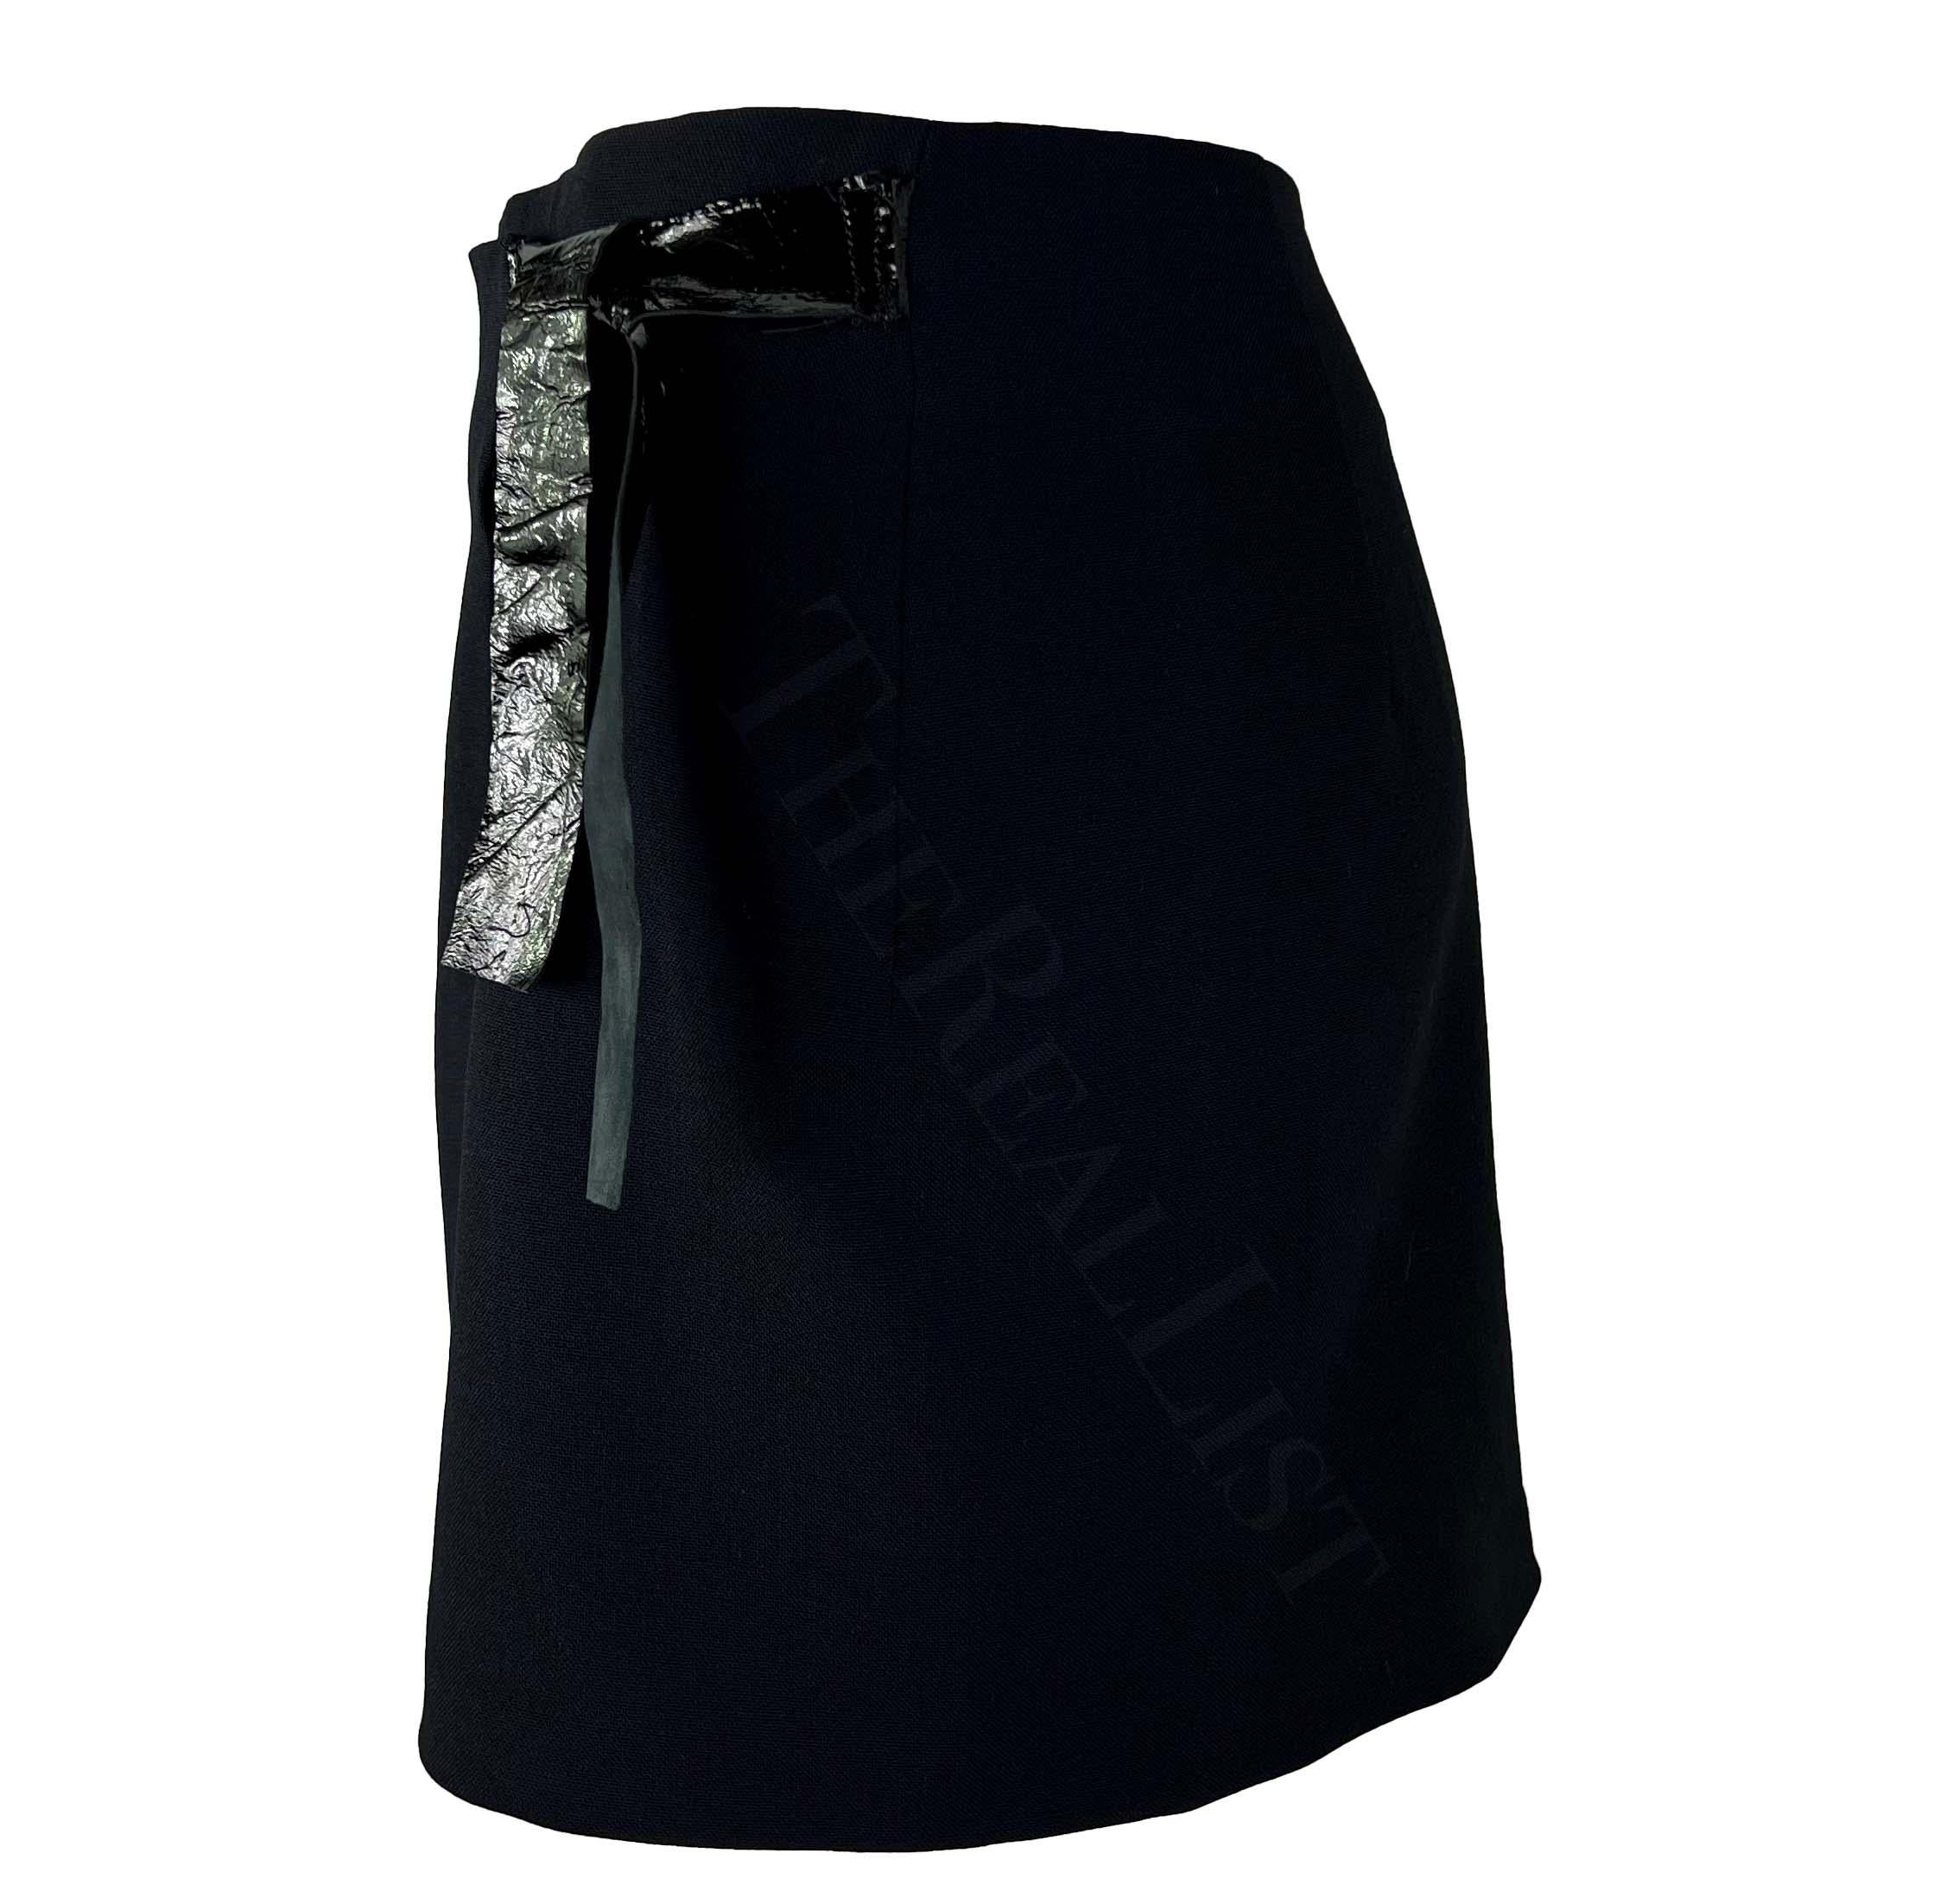 S/S 1998 Gucci by Tom Ford Prototype Sample Patent Leather Wrap Mini Skirt Pour femmes en vente